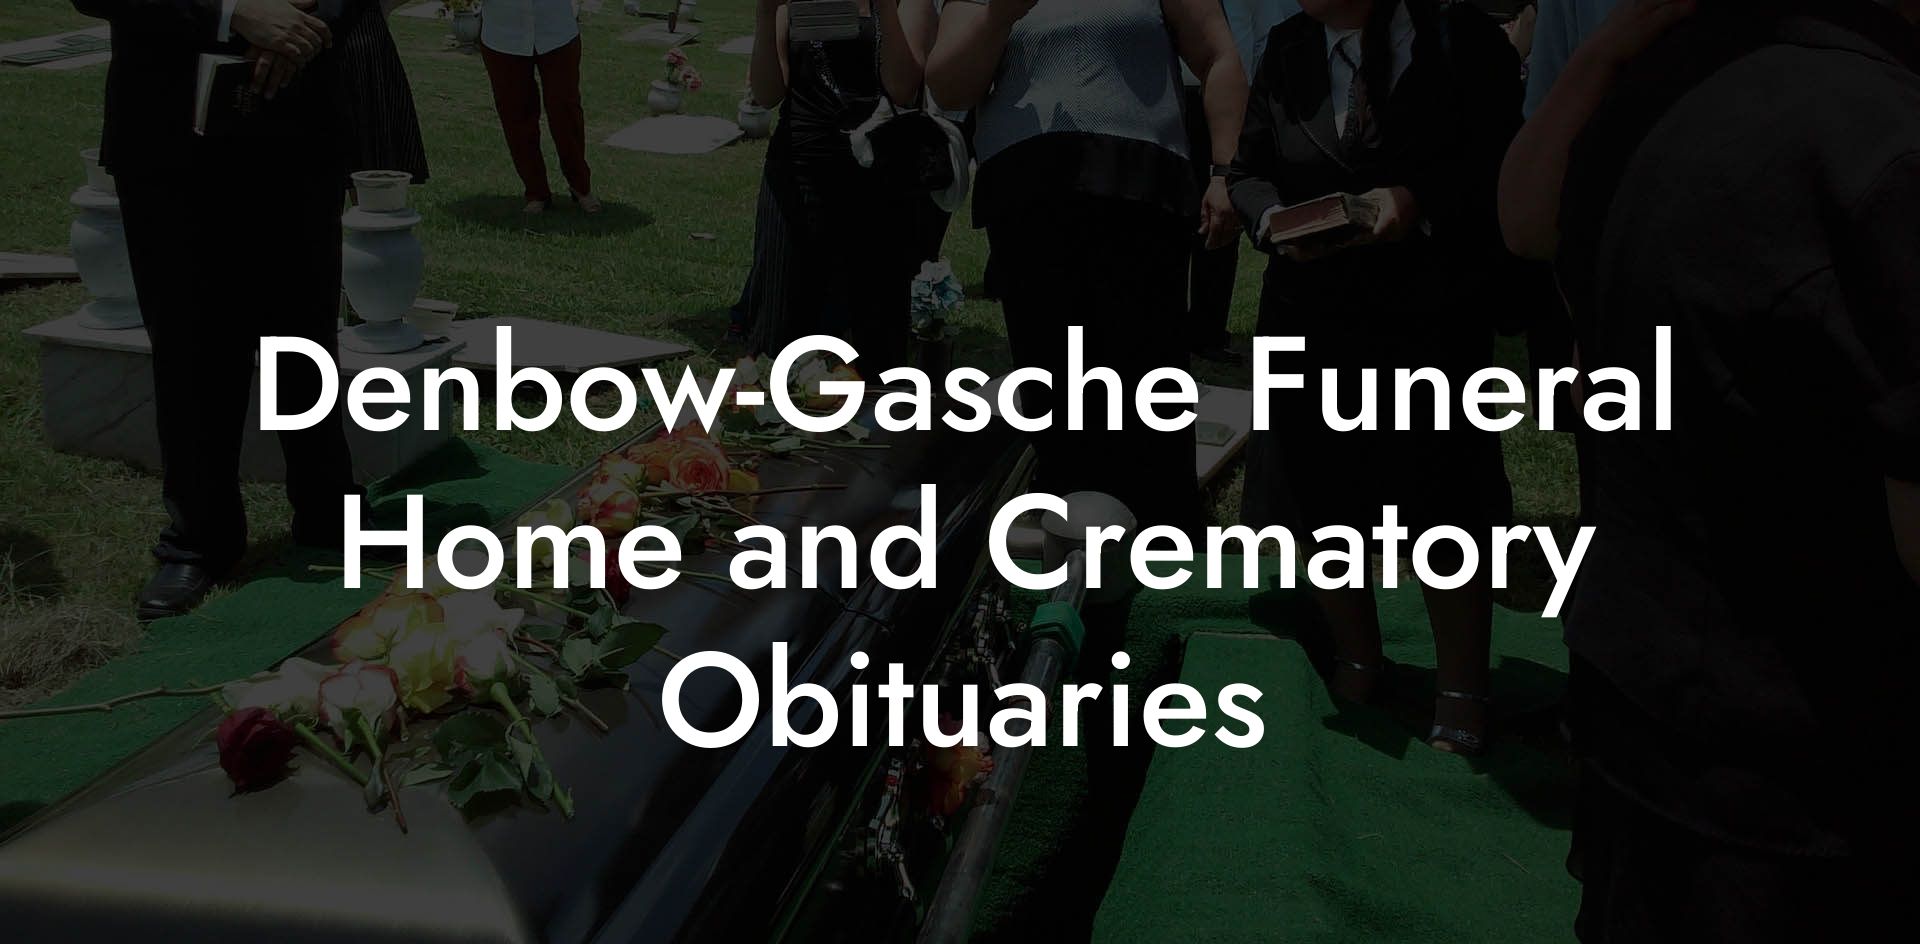 Denbow-Gasche Funeral Home and Crematory Obituaries